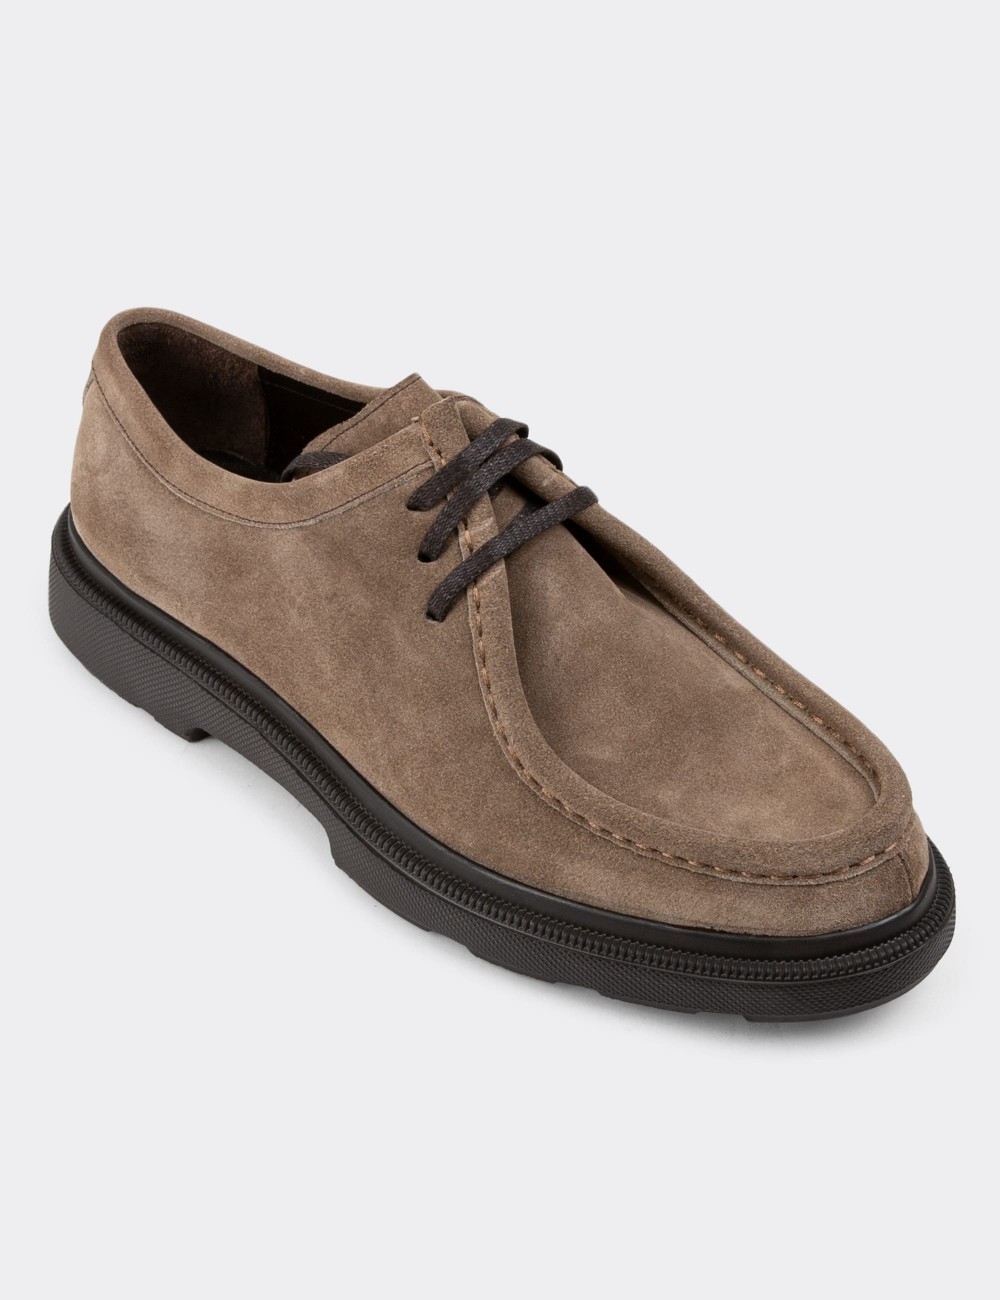 Sandstone Suede Leather Lace-up Shoes - 01851MVZNP01